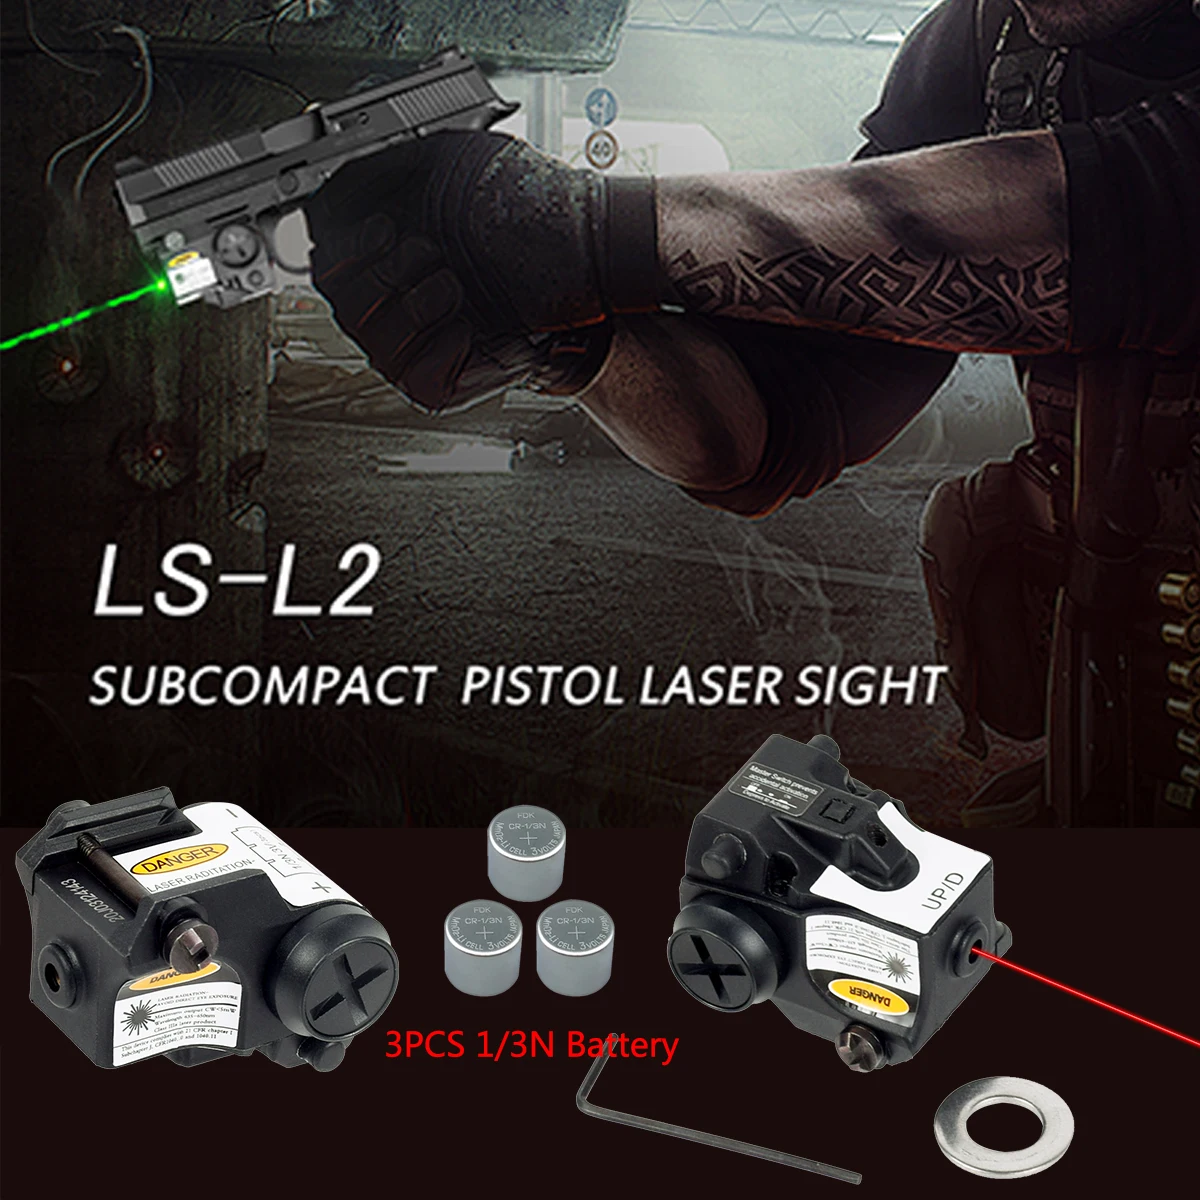 

Tactical LS-L2 Weapon Gun Red Green Dot IR Infrared Aiming Laser Pointer Sight With Battery For Pistol Taurus G2C G3C Glock 17